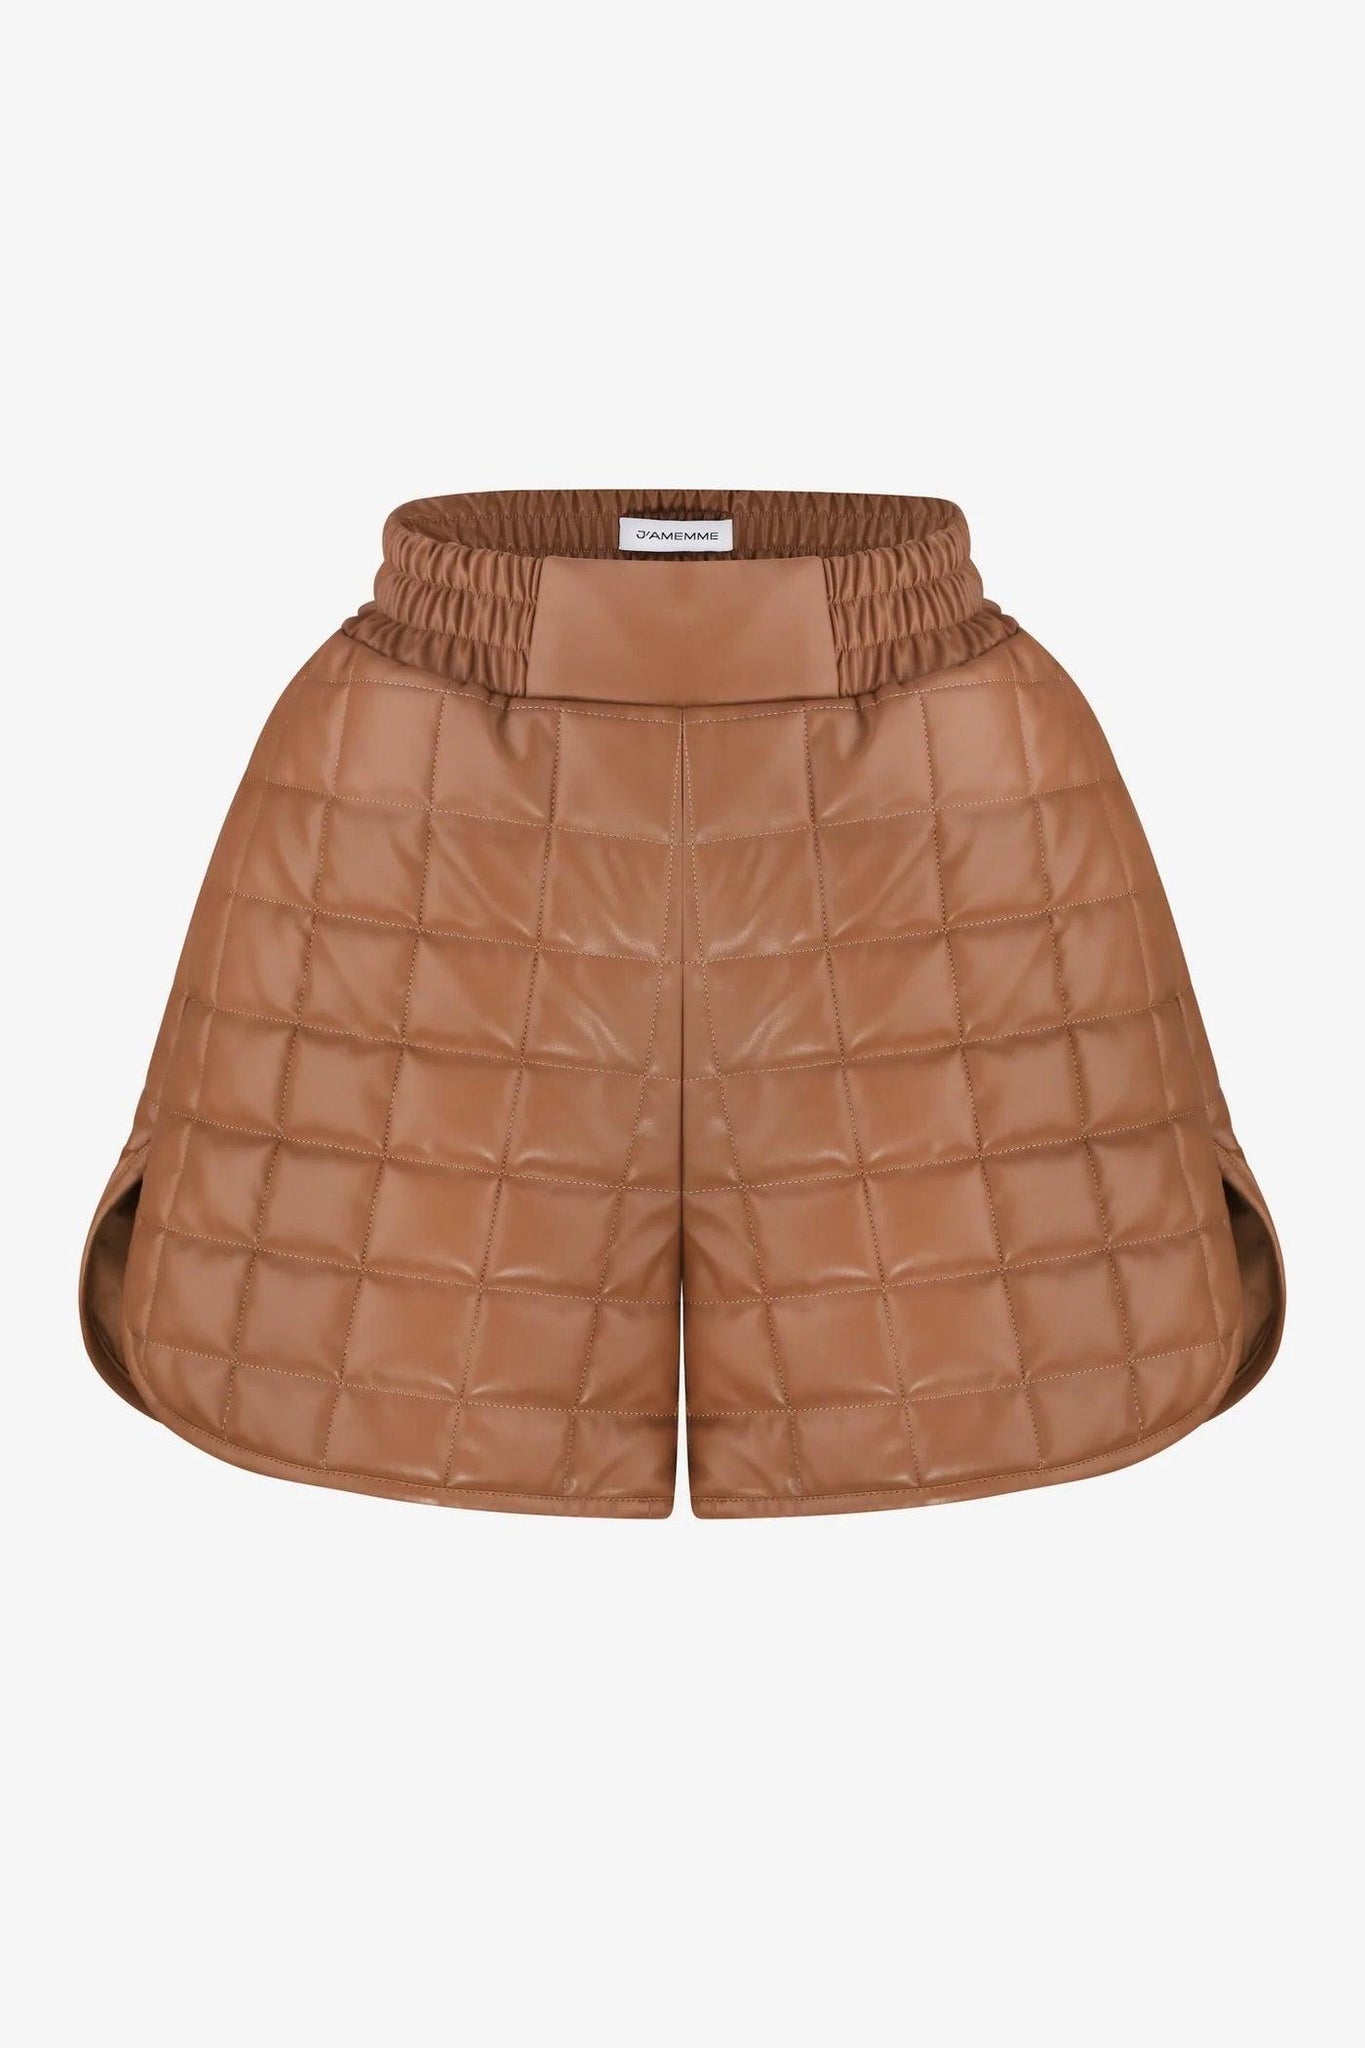 J'AMEMME quilted vegan leather shorts - SONI LONDON